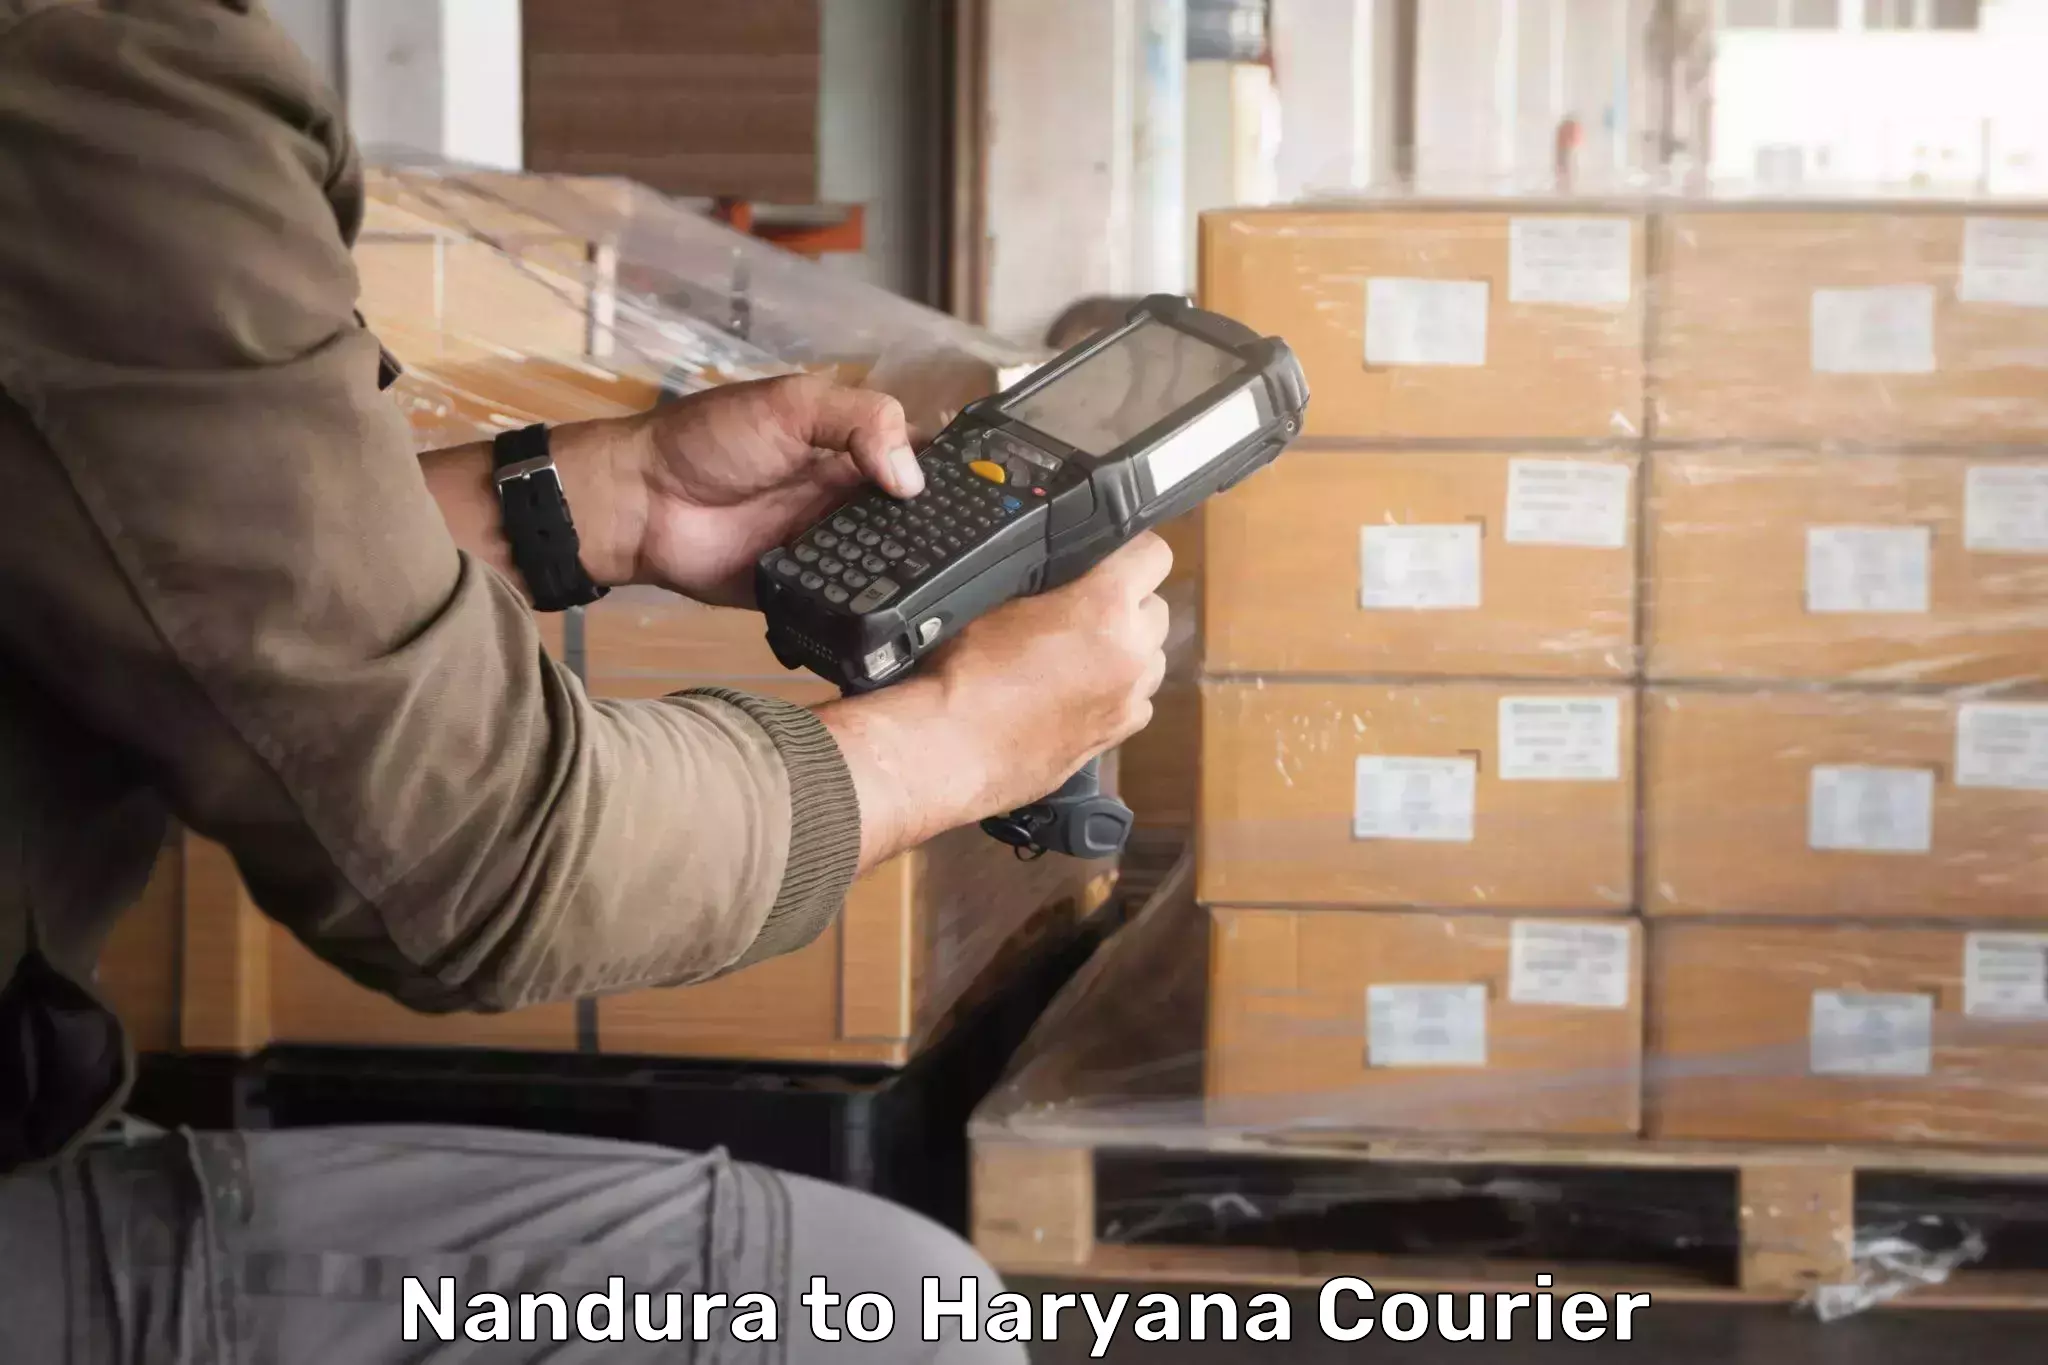 Reliable courier service Nandura to Nuh